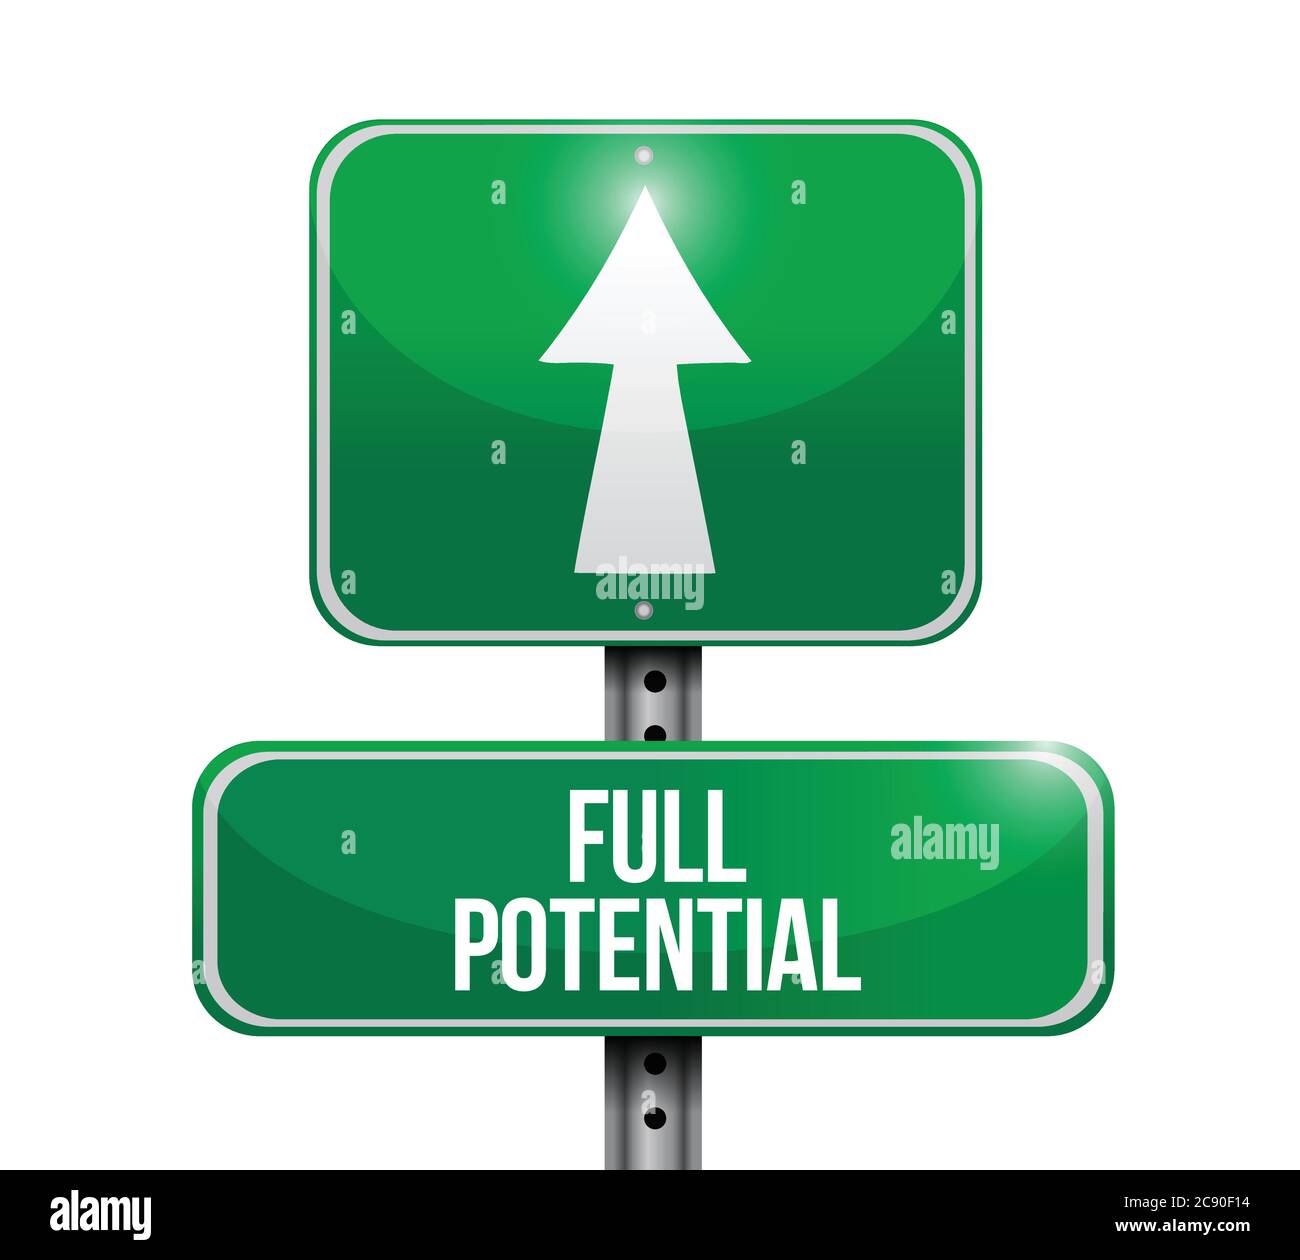 Full potential road sign illustration design over a white background Stock Vector